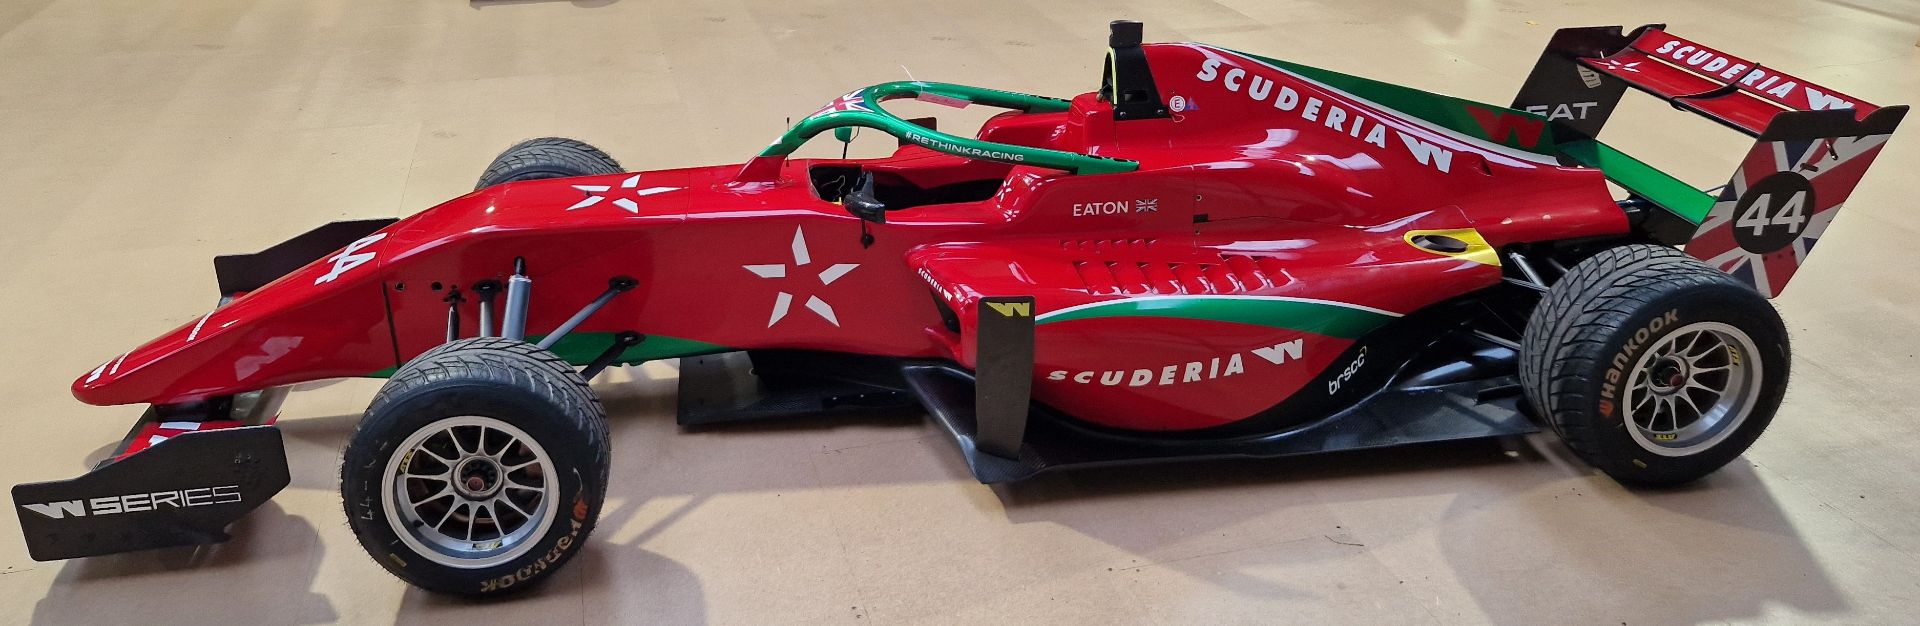 One TATUUS F3 T-318 Alfa Romeo Race Car Chassis No. 037 (2019) Finished in SCUDERIA Livery as Driven - Bild 2 aus 10